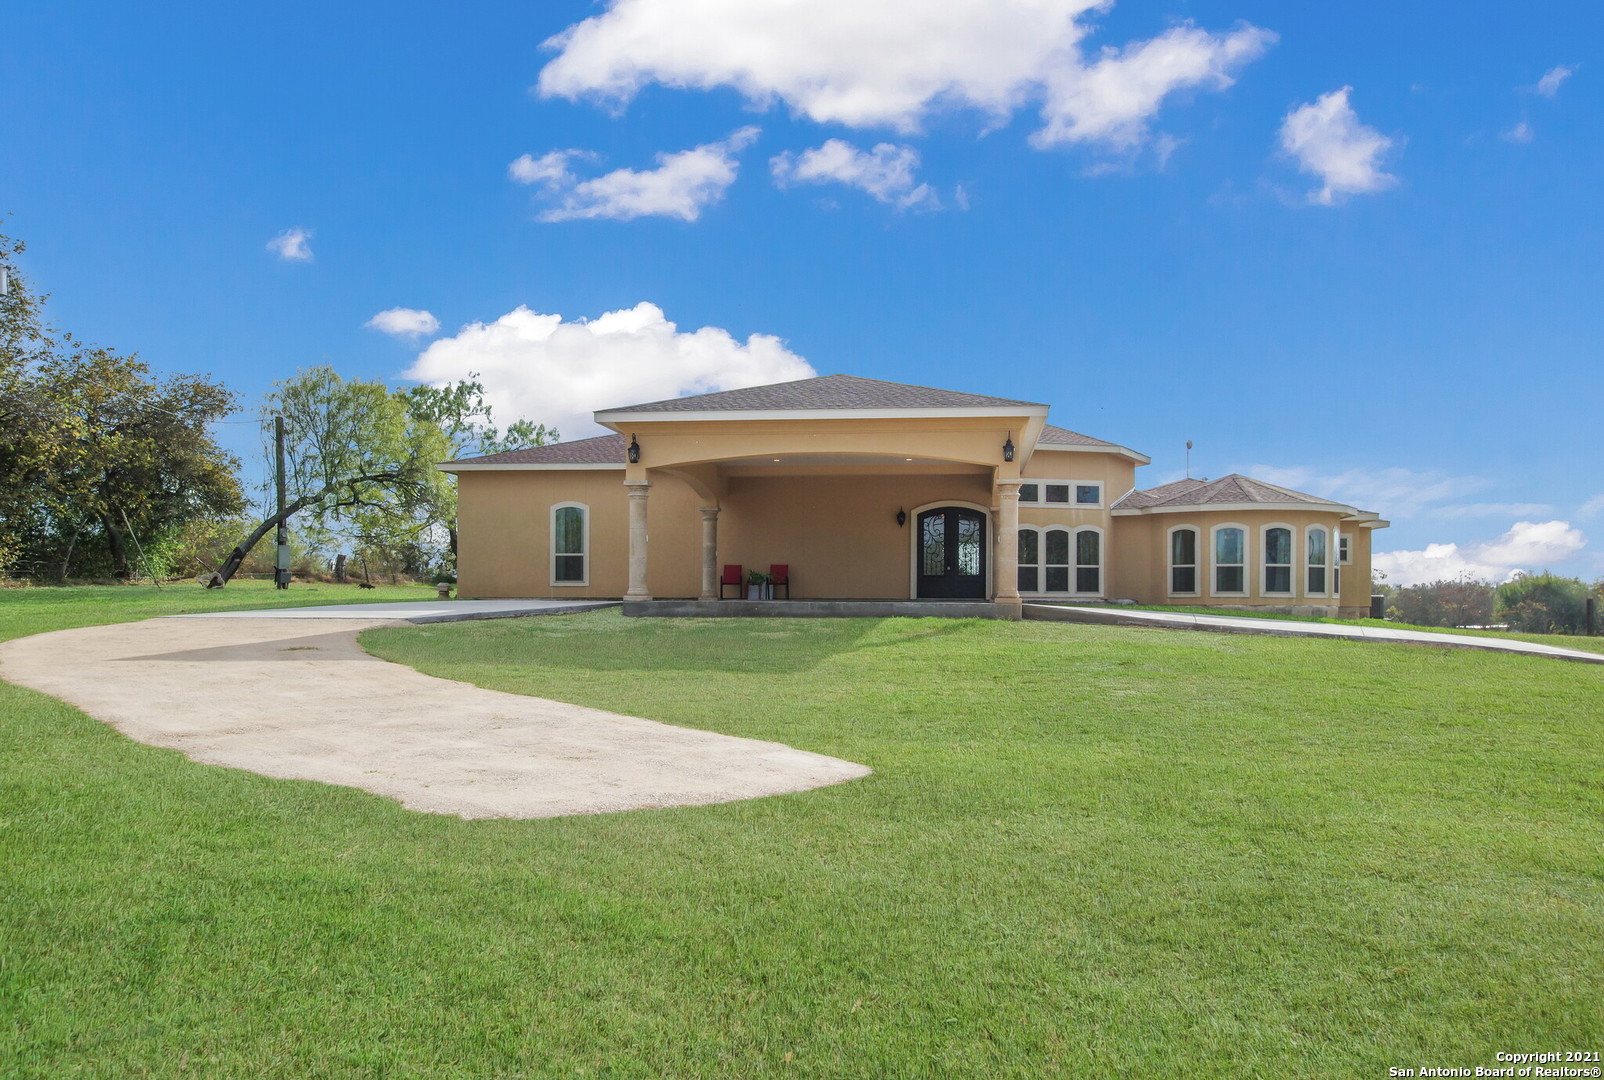 Magnificent Home & Gorgeous Property! Enjoy country living & plenty of space in a 3800 sqft Custom Home on 3.88 acres, a 900sqft 2/1 Guest house, and 1200 sqft large Garage/Shop that even has an office, bathroom & shower. Be impressed w/ the 16 ft High Ceilings & Beautiful Chandelier. Fall in Love w/ The Exquisite attention to detail w/ Tiered Ceilings, Gourmet Kitchen, and a perfect layout for enjoyment & entertaining family and friends. You will not want to leave after seeing the masterfully designed Chef Large Kitchen w/ custom Granite, Cabinets, and 3 stoves. The Master Suite could be what you are looking for w/ patio access to the backyard Oasis & the large stretched covered patio. Seeing the Guest house will increase your love for the property. Walk into the dream Shop that will allow you to fulfill your imagination and create w/ High ceilings, insulated walls, an additional office space, and shower. Best of all...It will feel like home!!